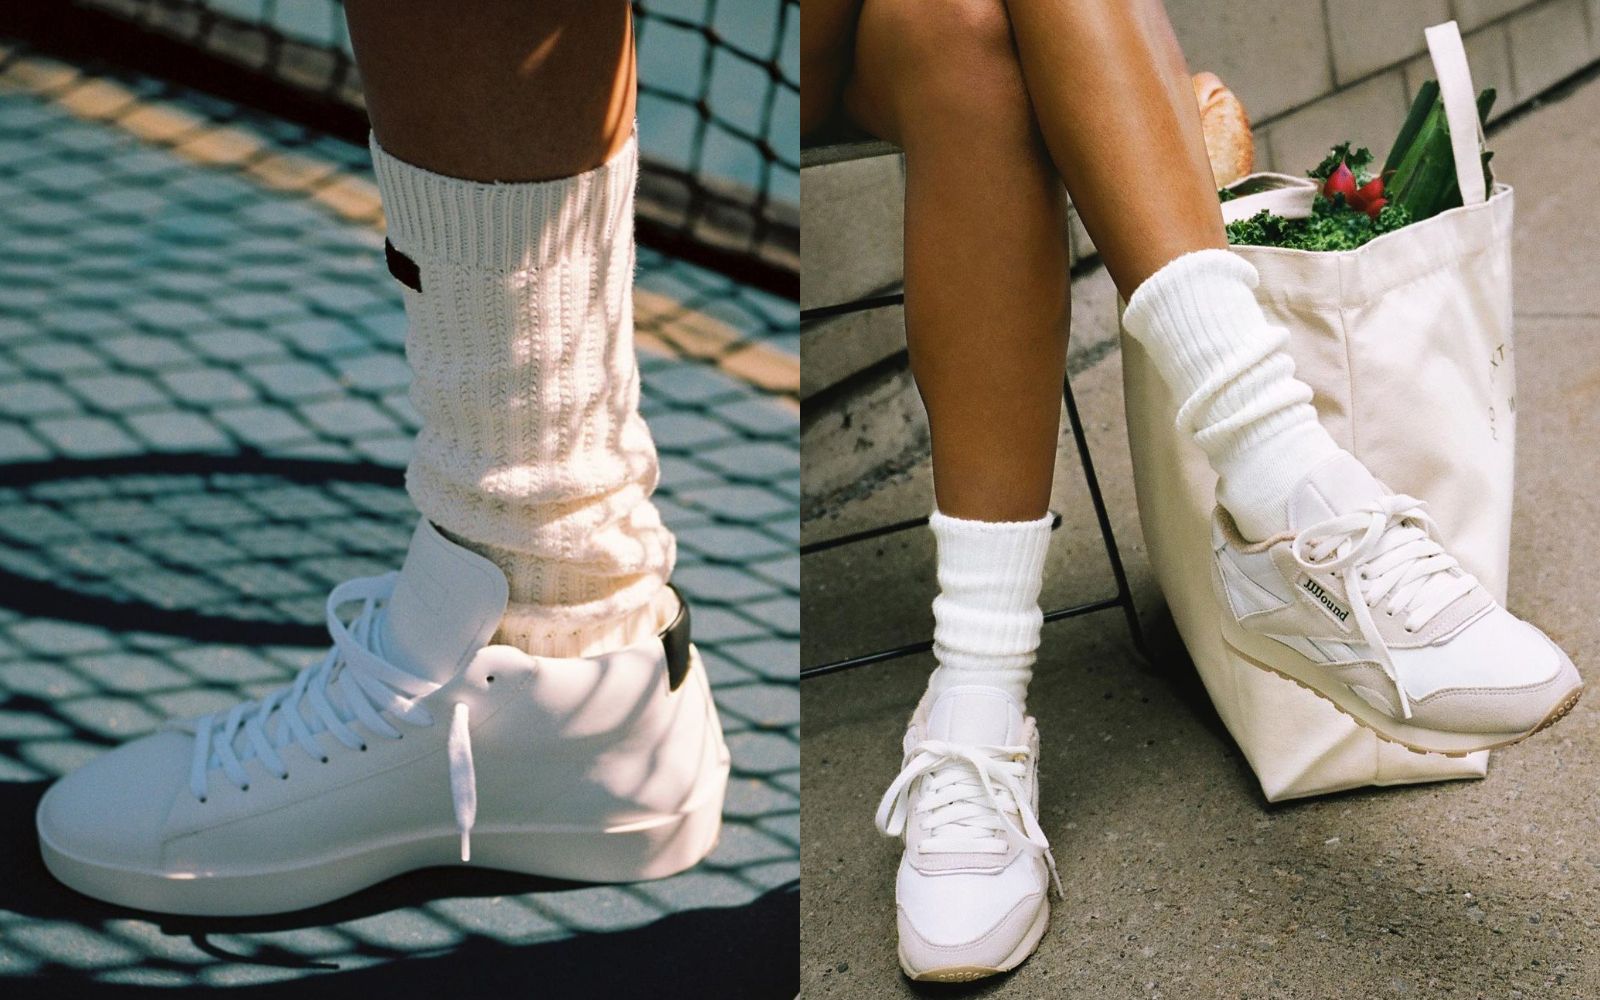 How To Style The Crew Socks Fashion Trend: 10 Ways To Wear Long Socks ...